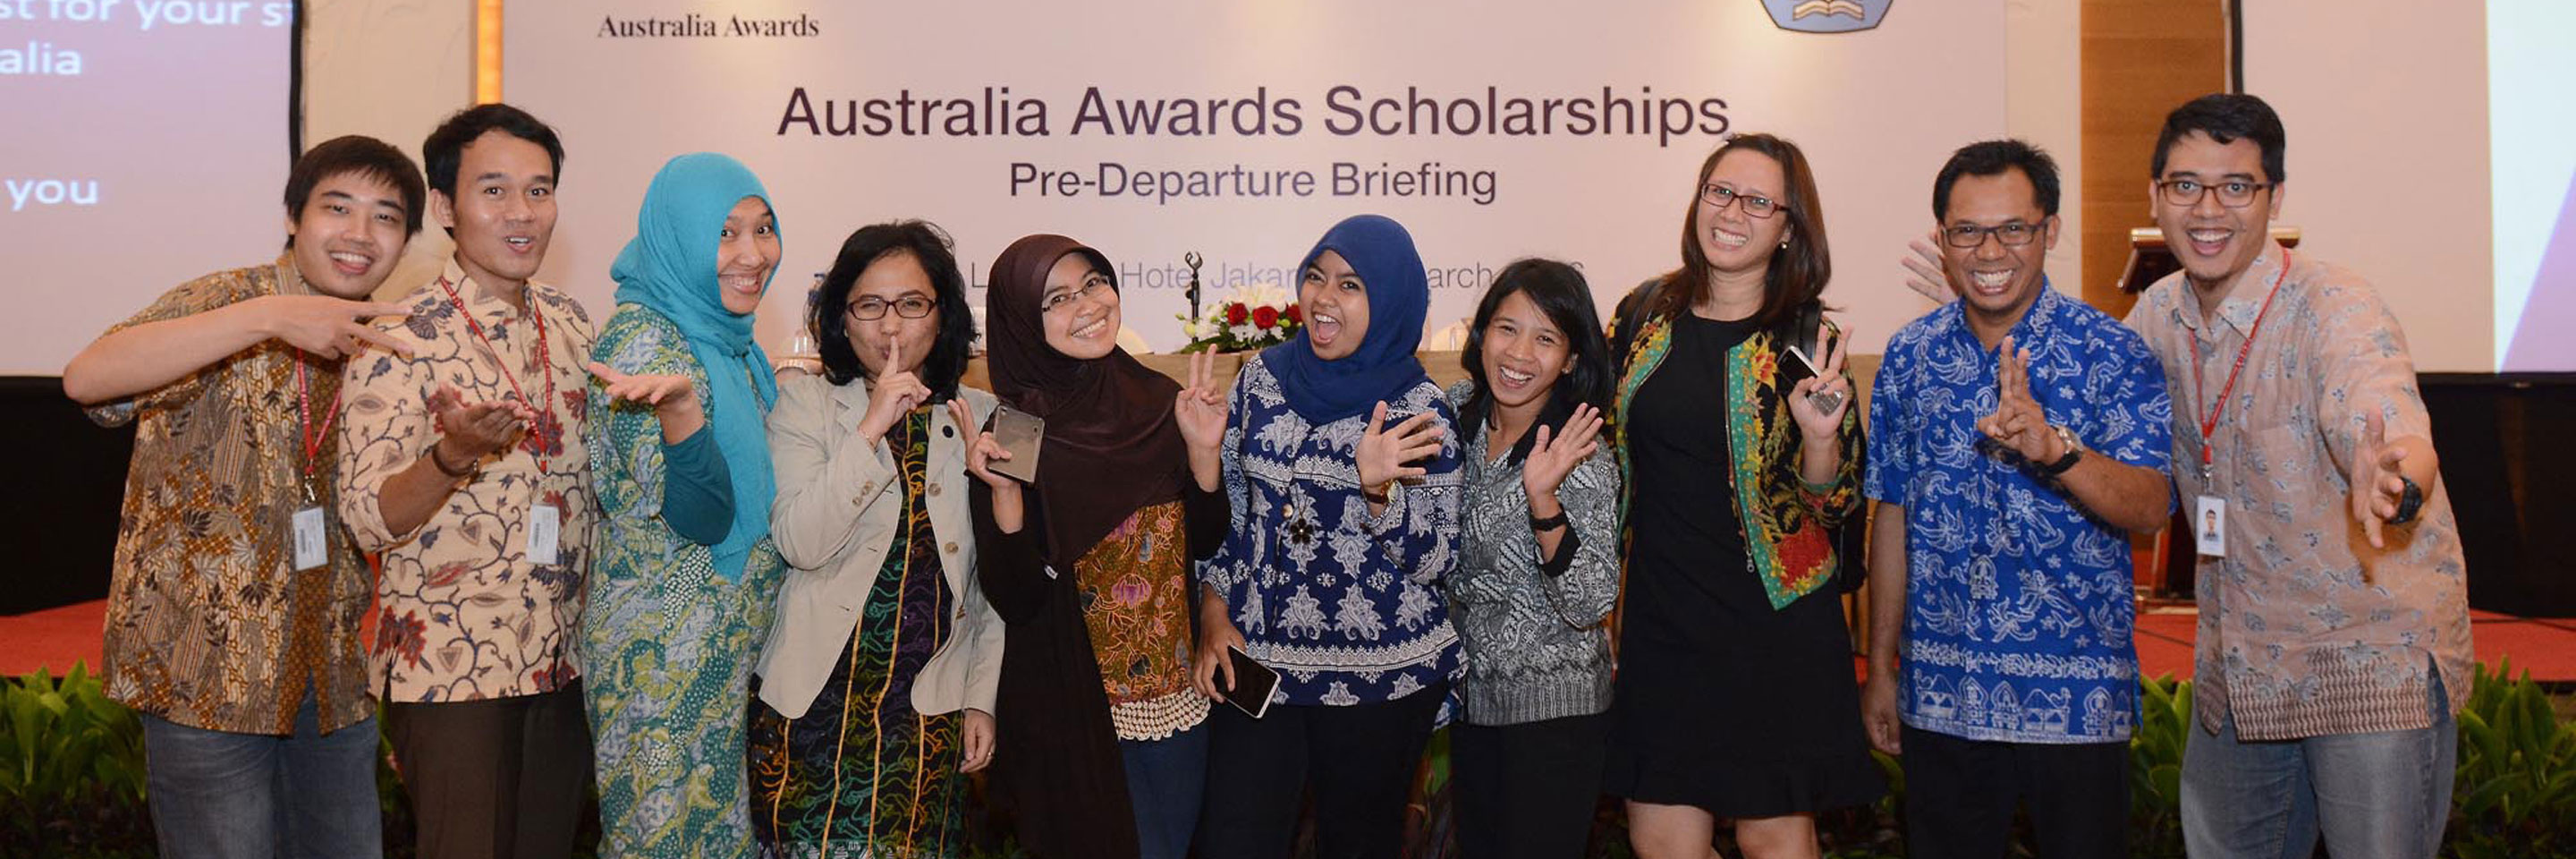 Australia Awards Scholars participate in a Pre-Departure Briefing before embarking on their study in Australia.